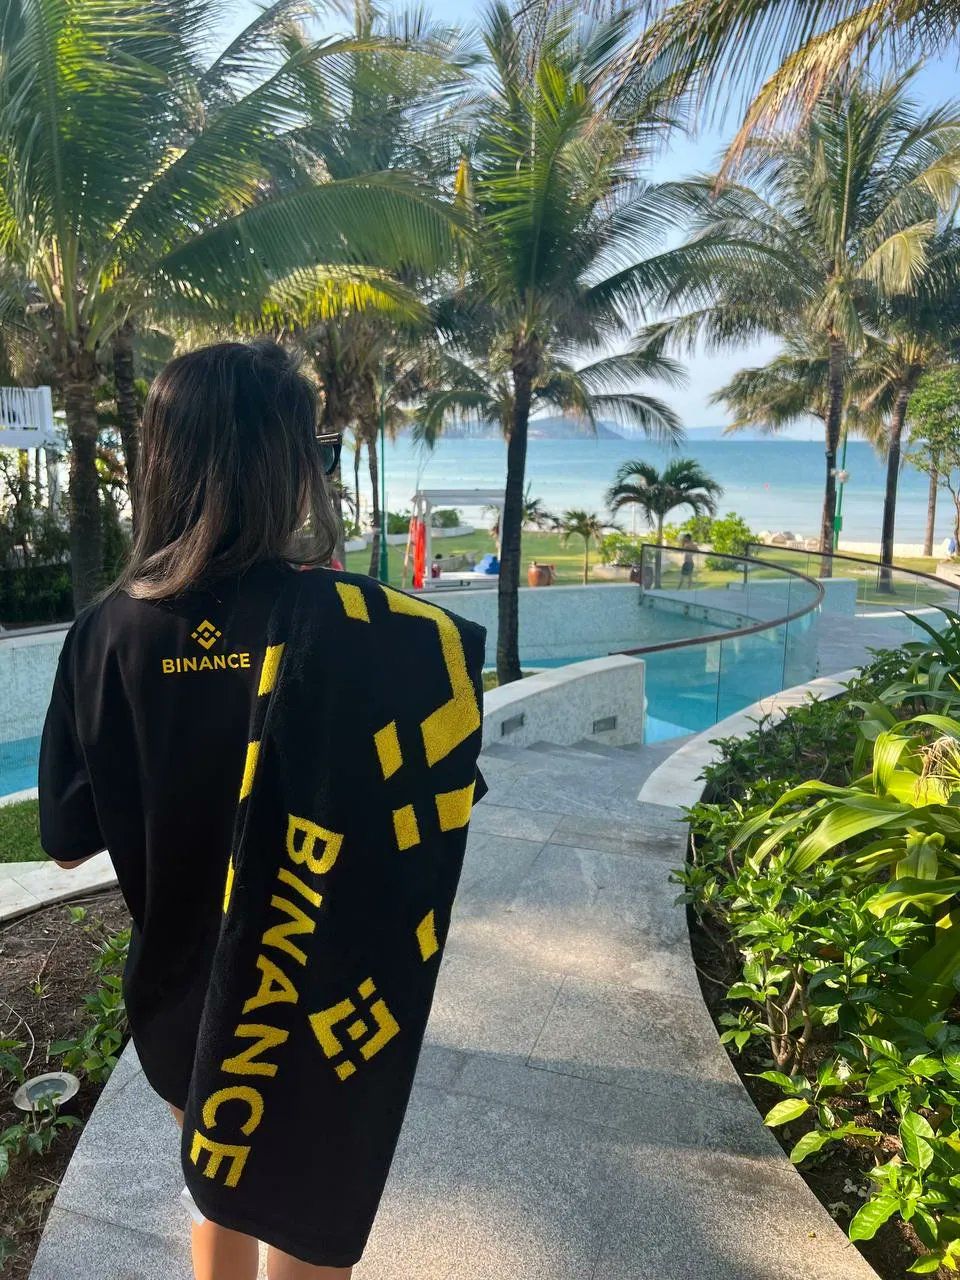 Bitcoin and Binance: The Golden Key to Freedom for Digital Nomads in the Paradise by the Ocean